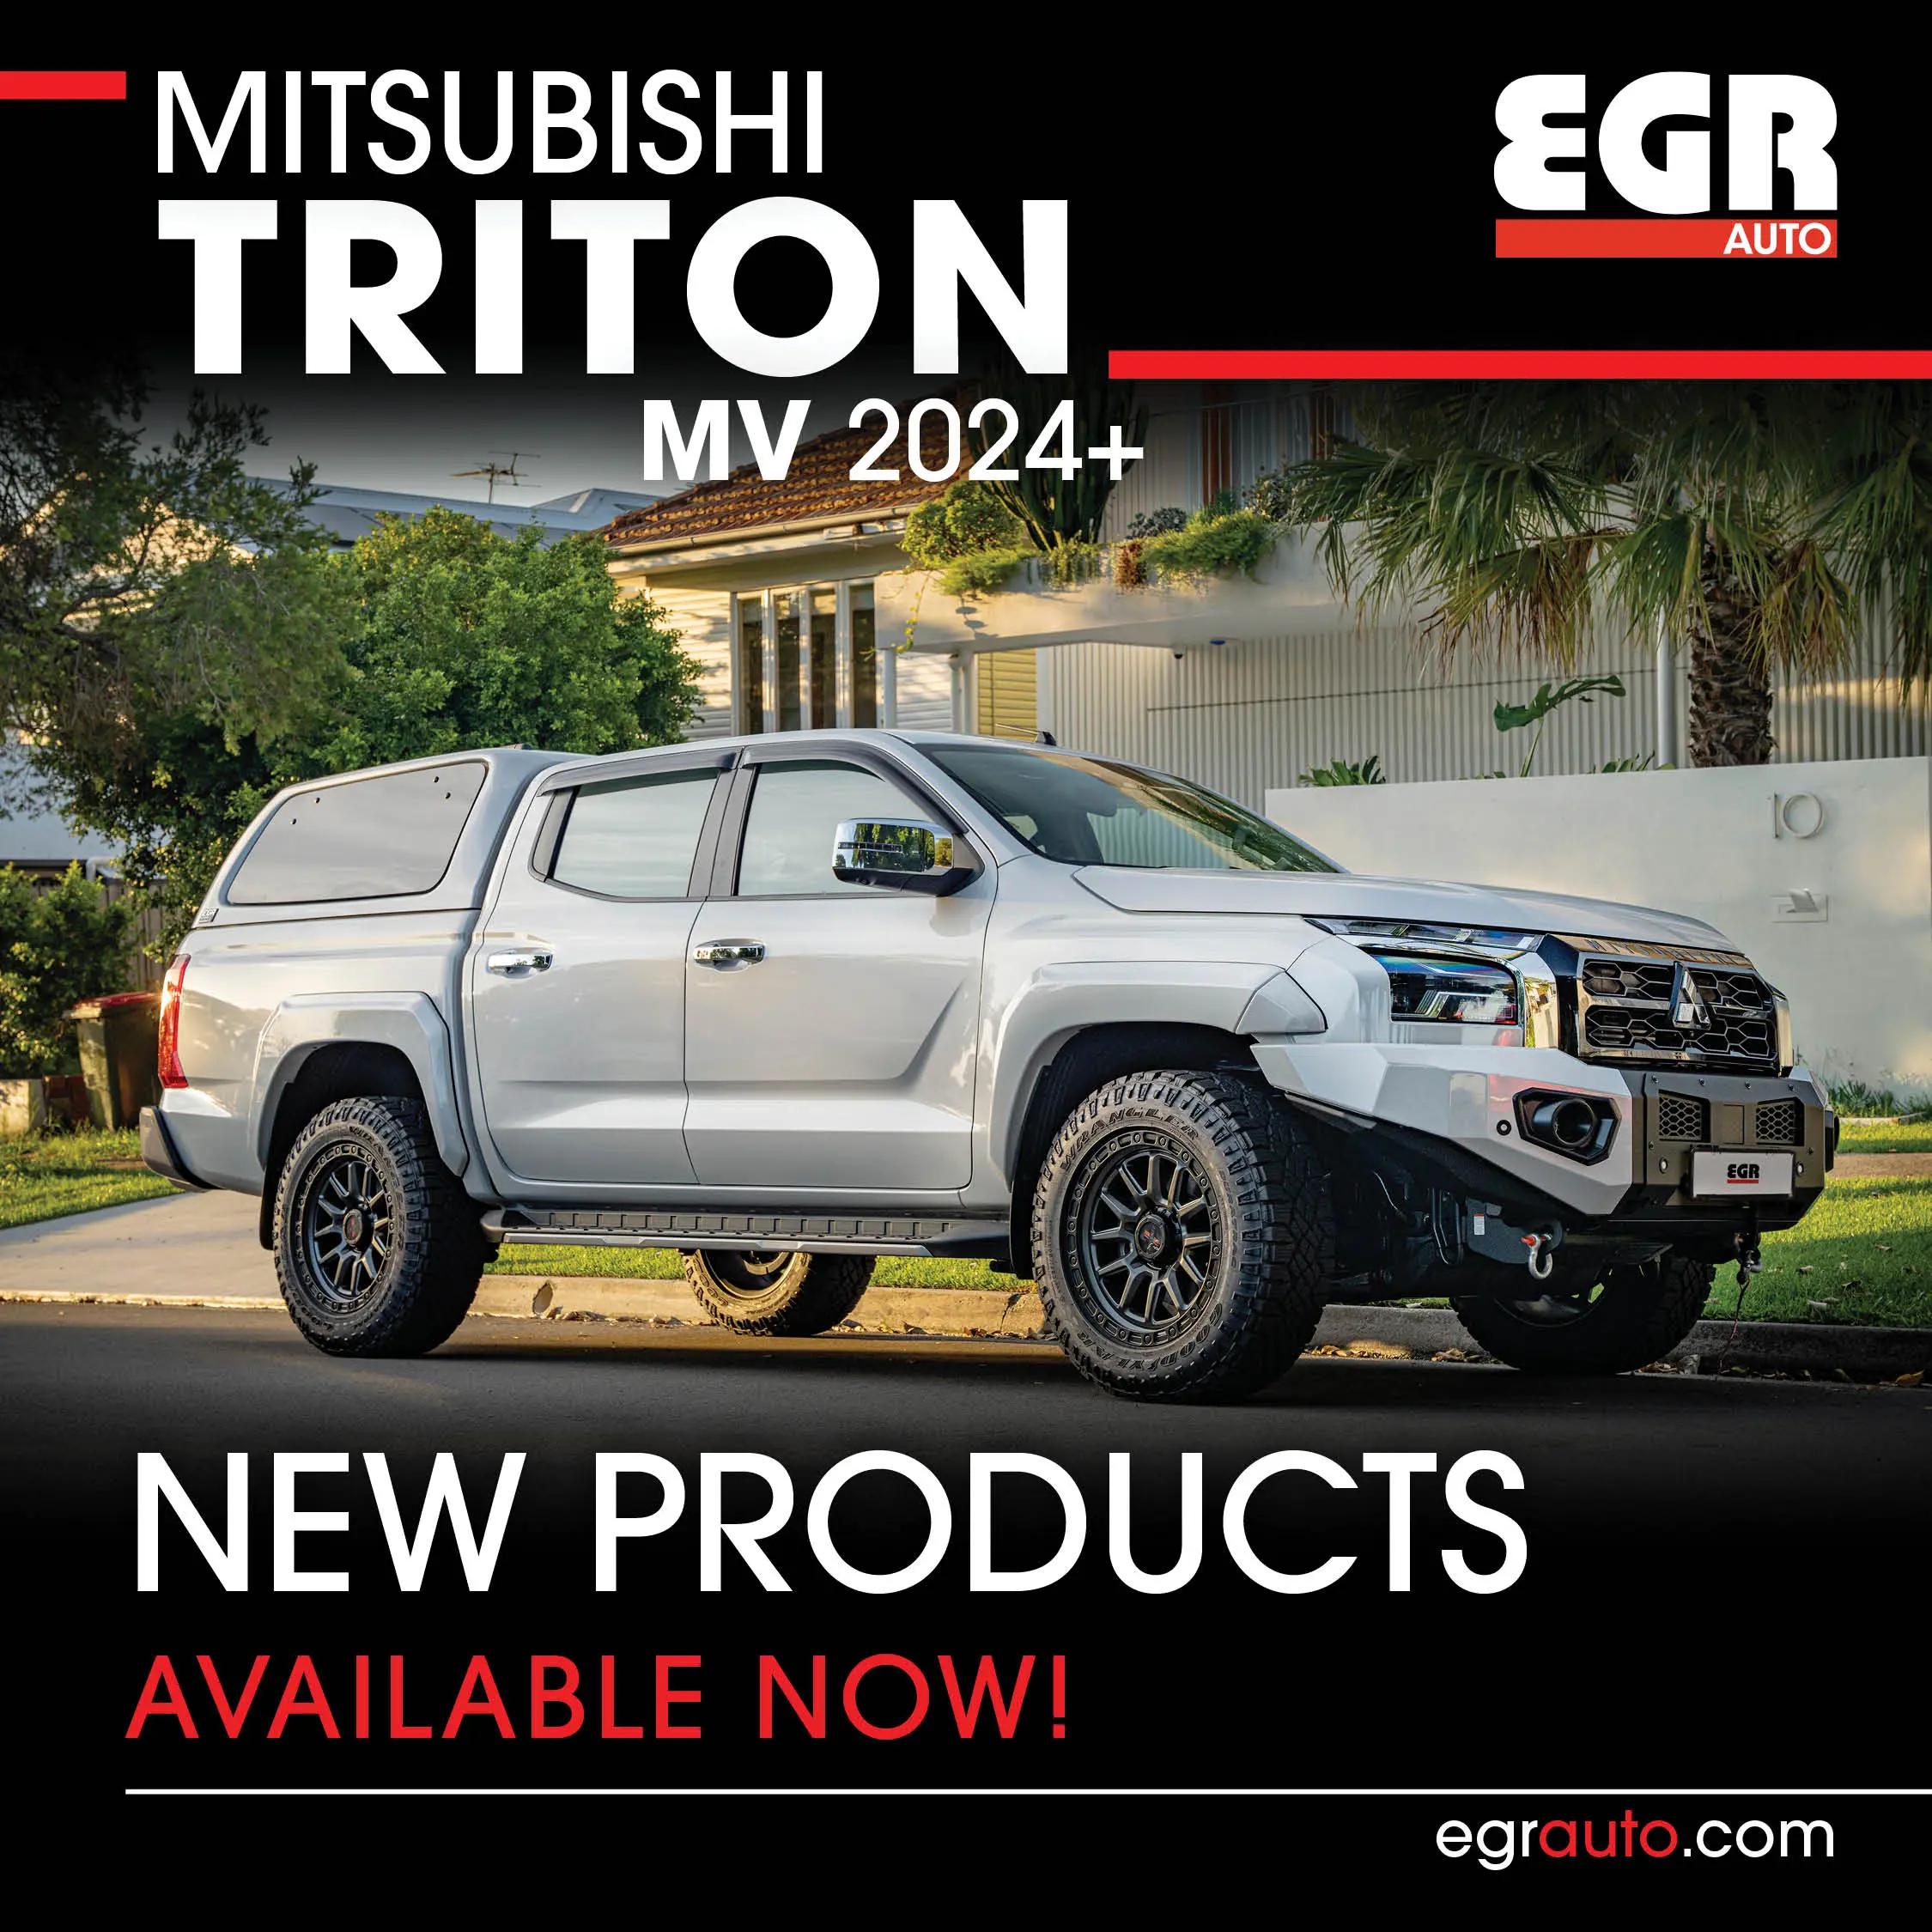 Promo banner - Click here for new EGR products available now for the Mitsubishi Triton MV 2024.